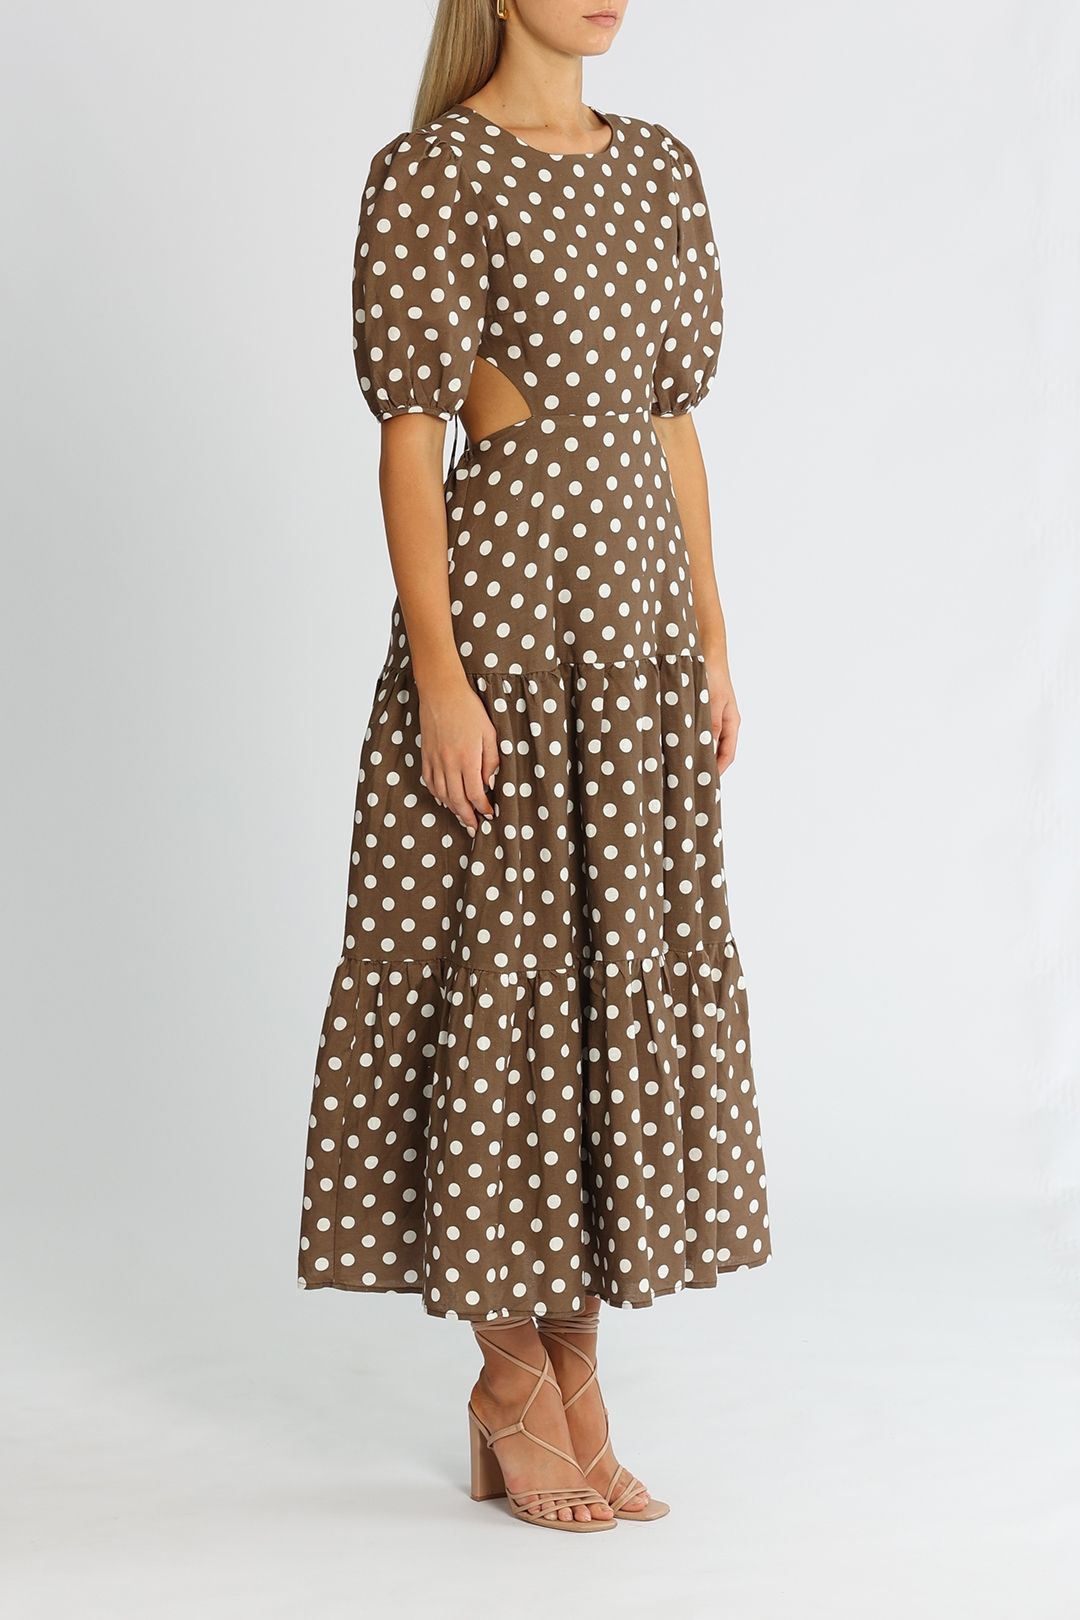 Charlie Holiday The Flores Midi Dress Brown Spot Cutout